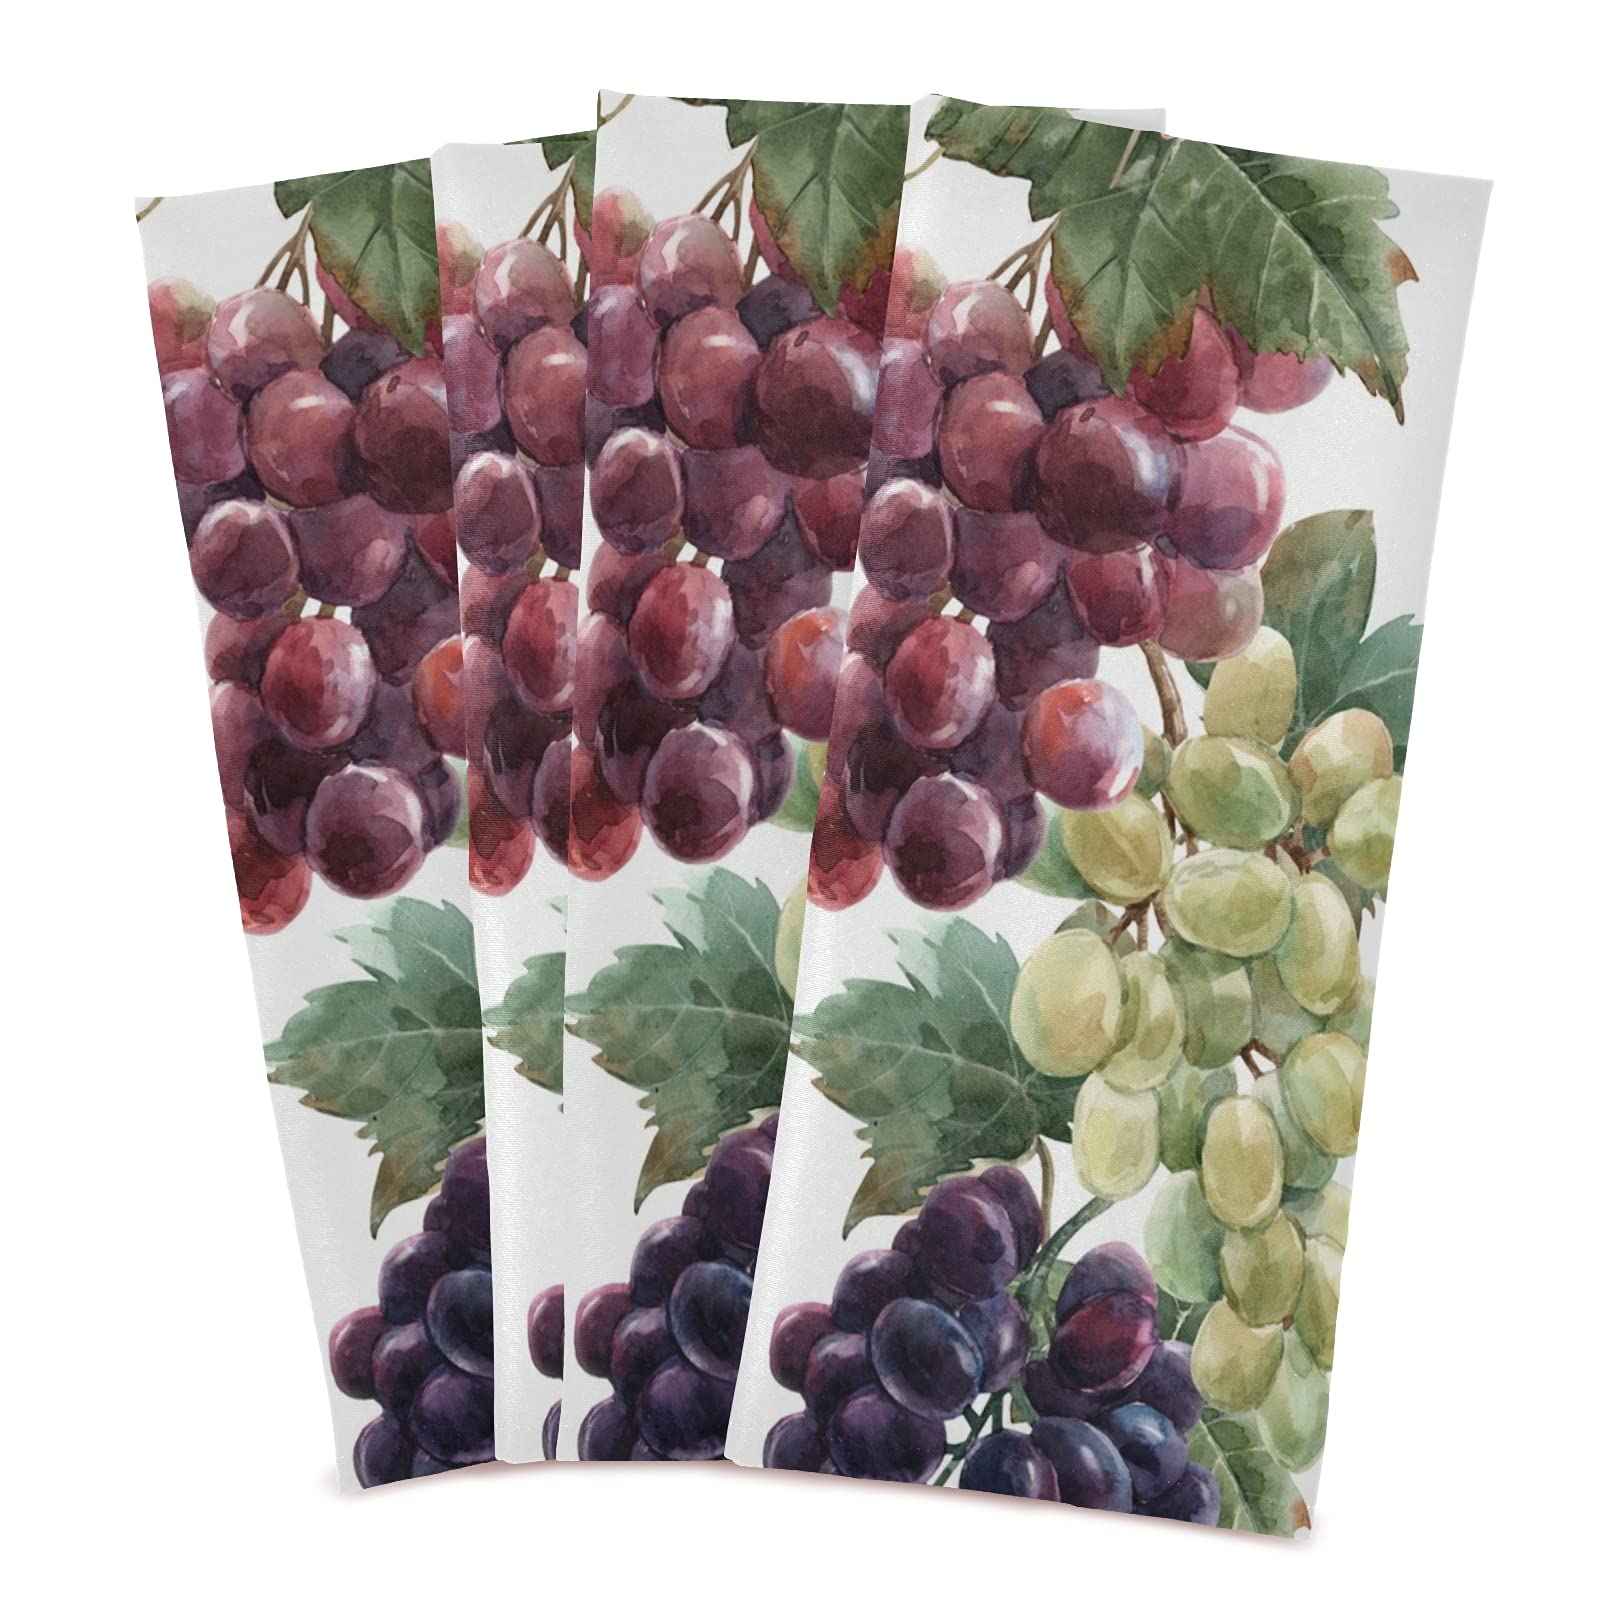 Dallonan Kitchen Towels Set of 4 Red White and Black Grapes Vine Polyester Soft Absorbent Dishcloths Decorative Towels for Kitchen Hand Towels, Dish Towel, Tea Towels, 28x18 Inch